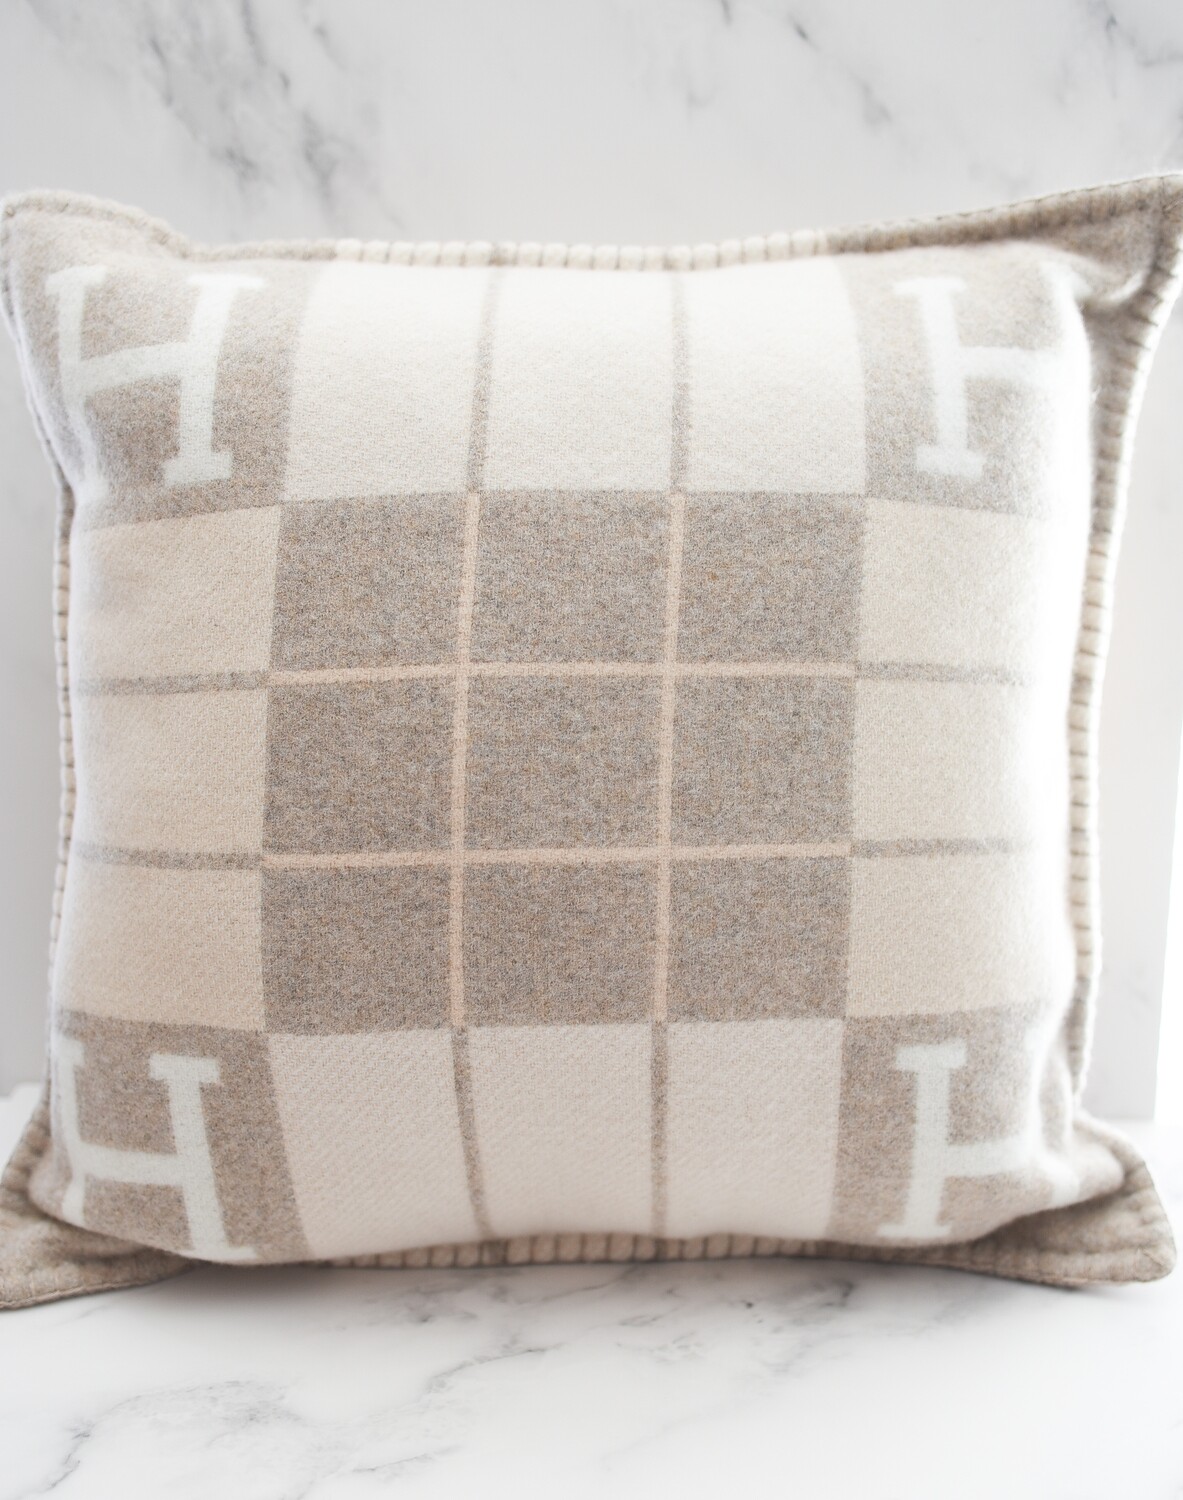 Hermes Pillow, Wool Cashmere Avalon III Pillow Coco Camomille, New in Dustbag GA001